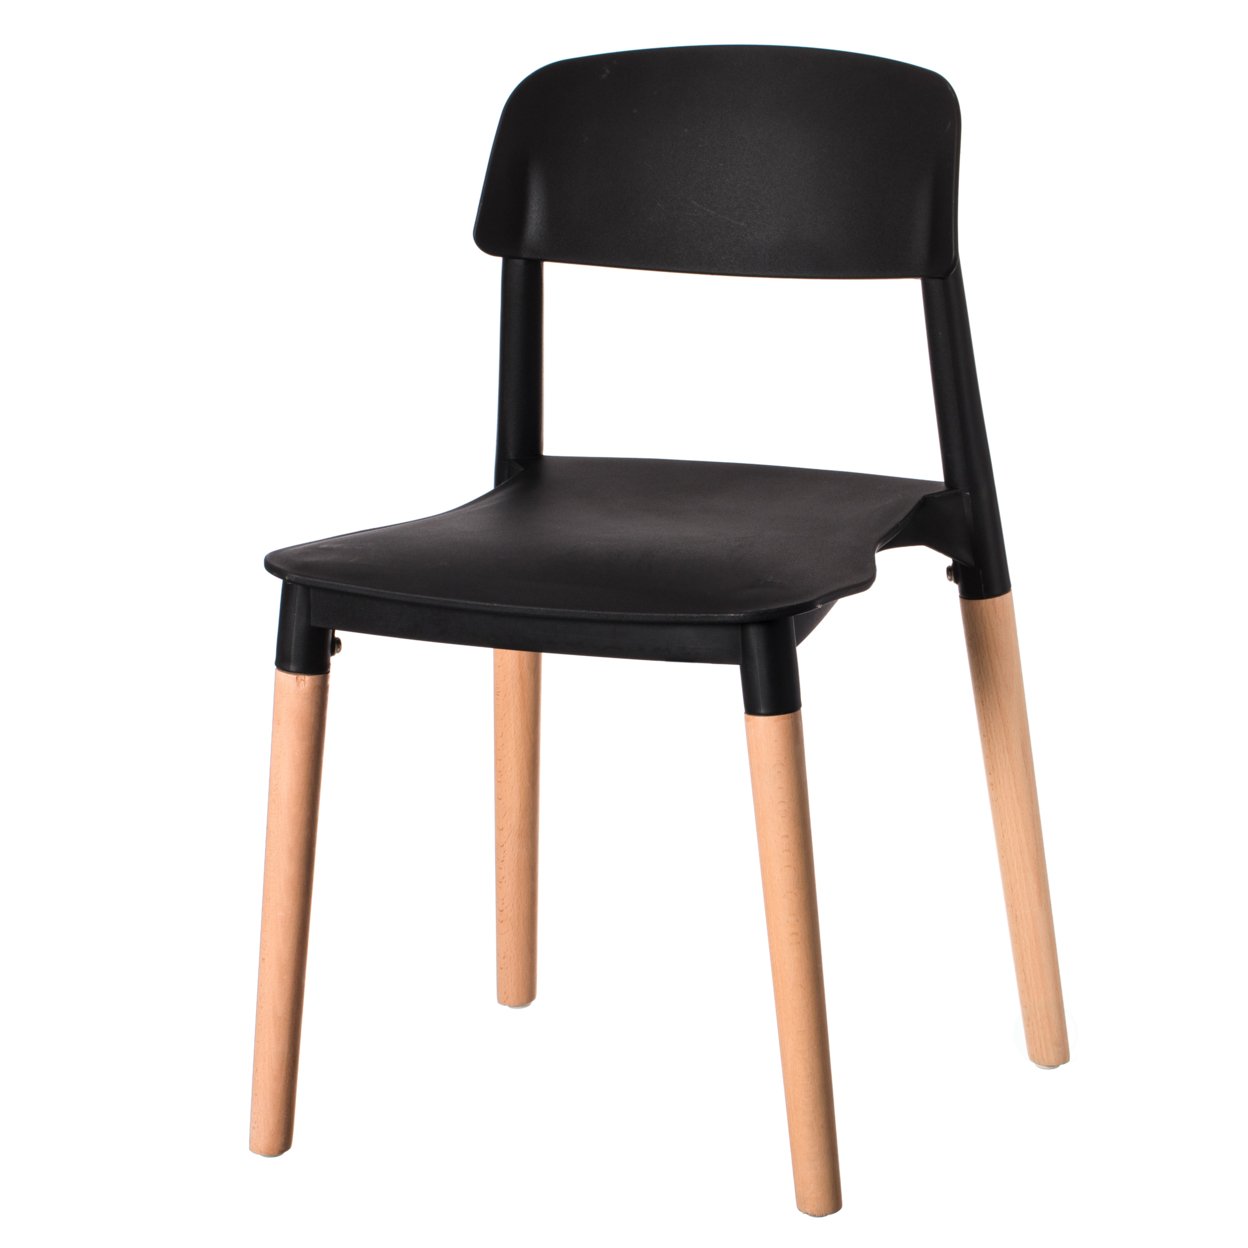 Modern Plastic Dining Chair Open Back With Beech Wood Legs - Set Of 4 Black